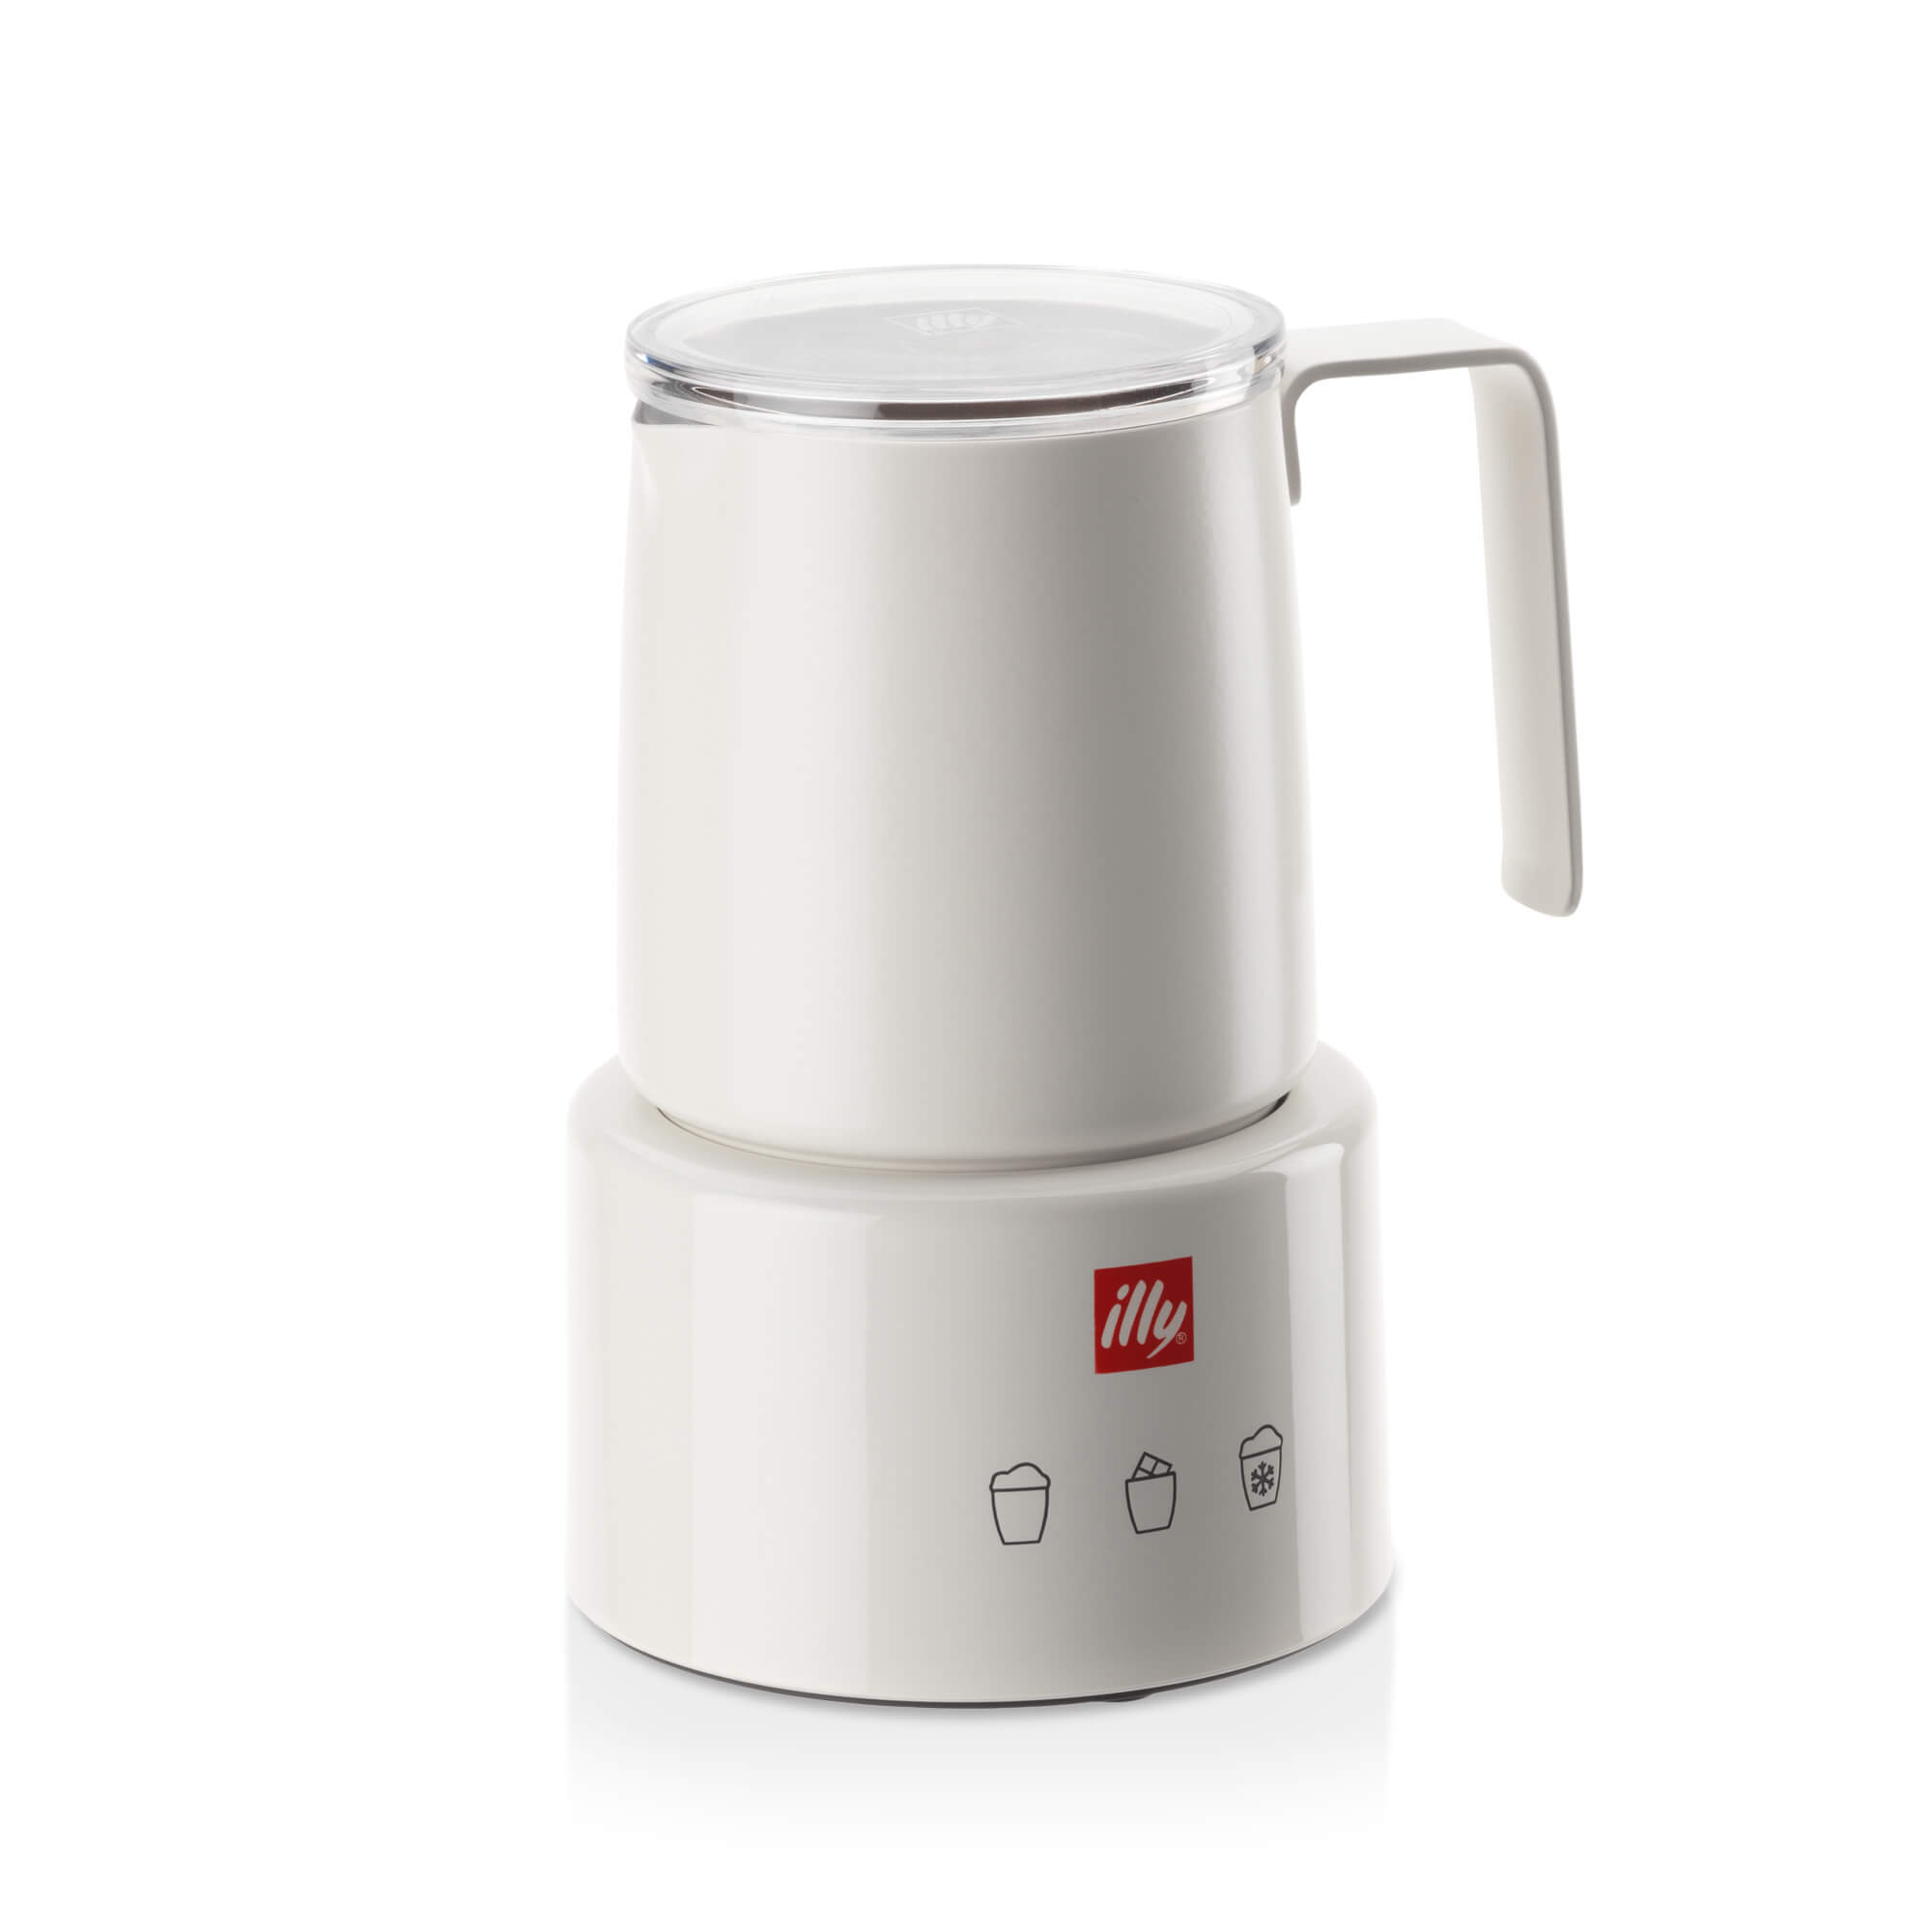 illy Electric Milk Frother White, Coffee Accessories, 02-07-0102